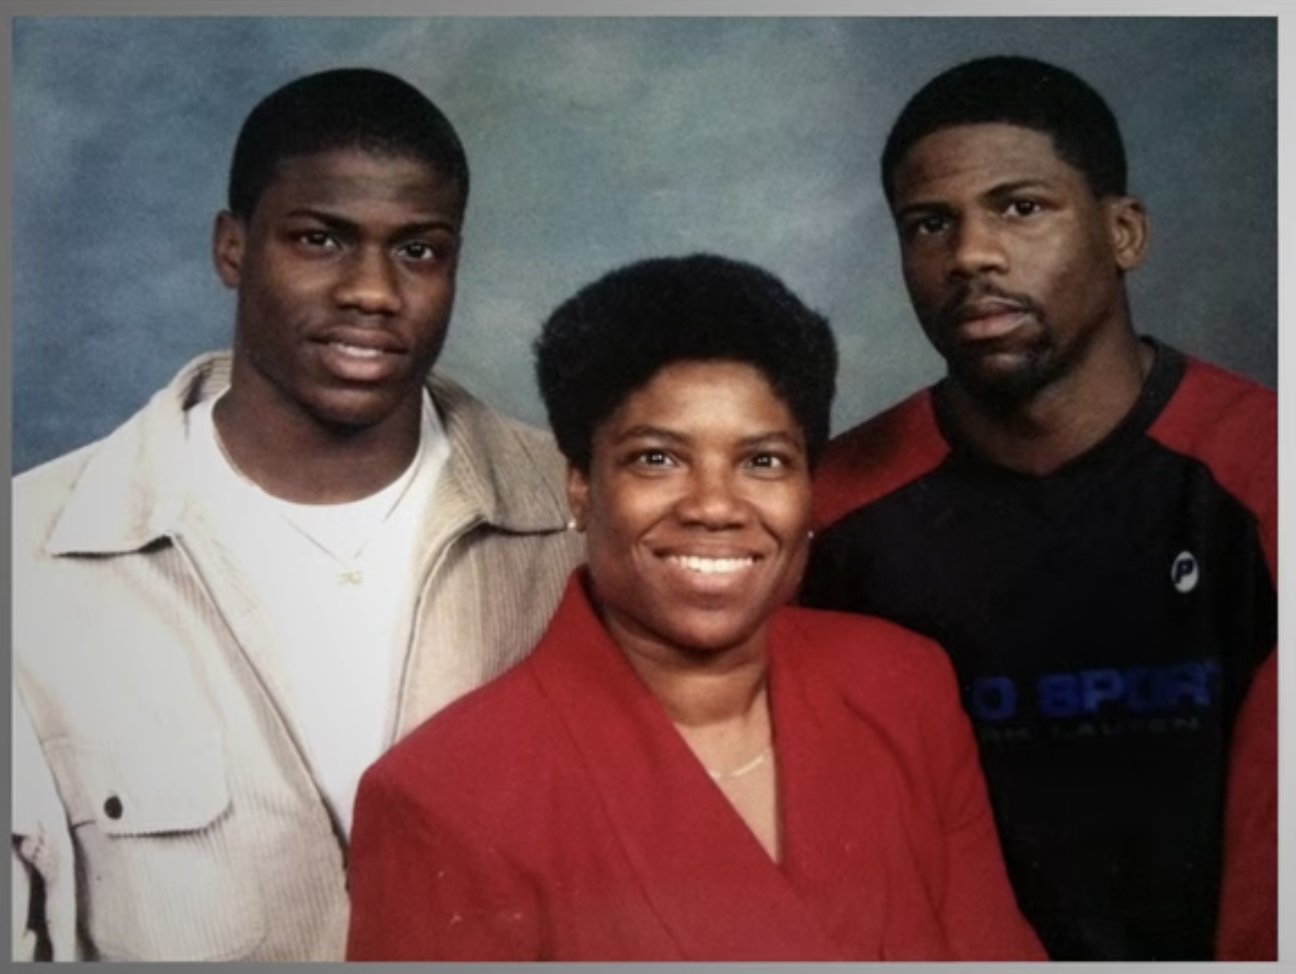 Why does Kevin Hart's mom look more like Kevin Hart than Kevin Hart himself?